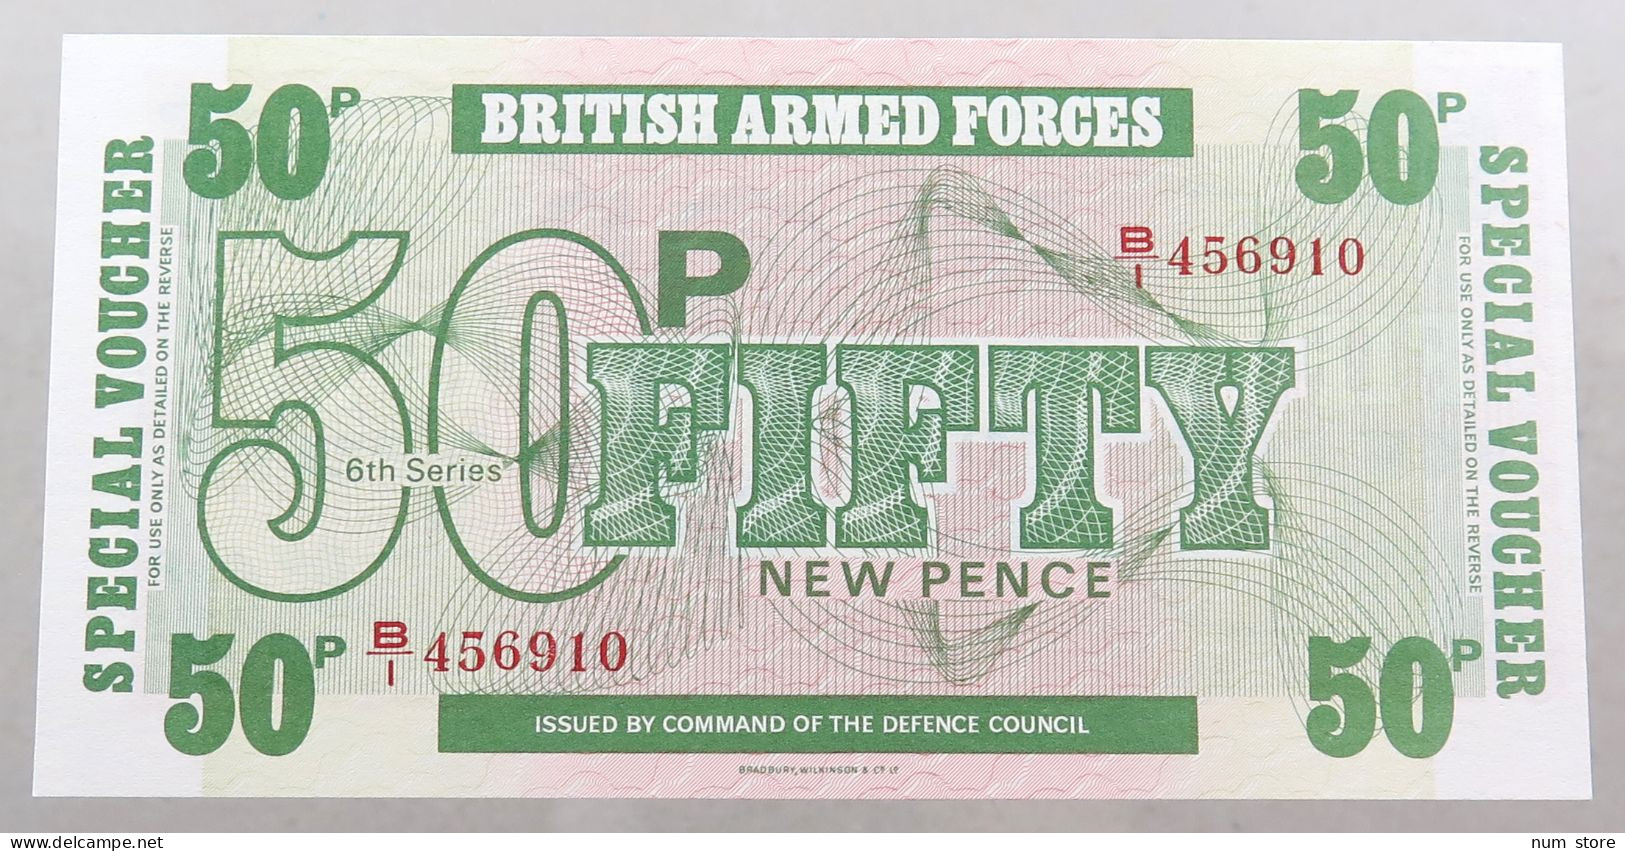 GREAT BRITAIN 50 PENCE  BRITISH ARMED FORCES #alb049 0171 - British Troepen & Speciale Documenten